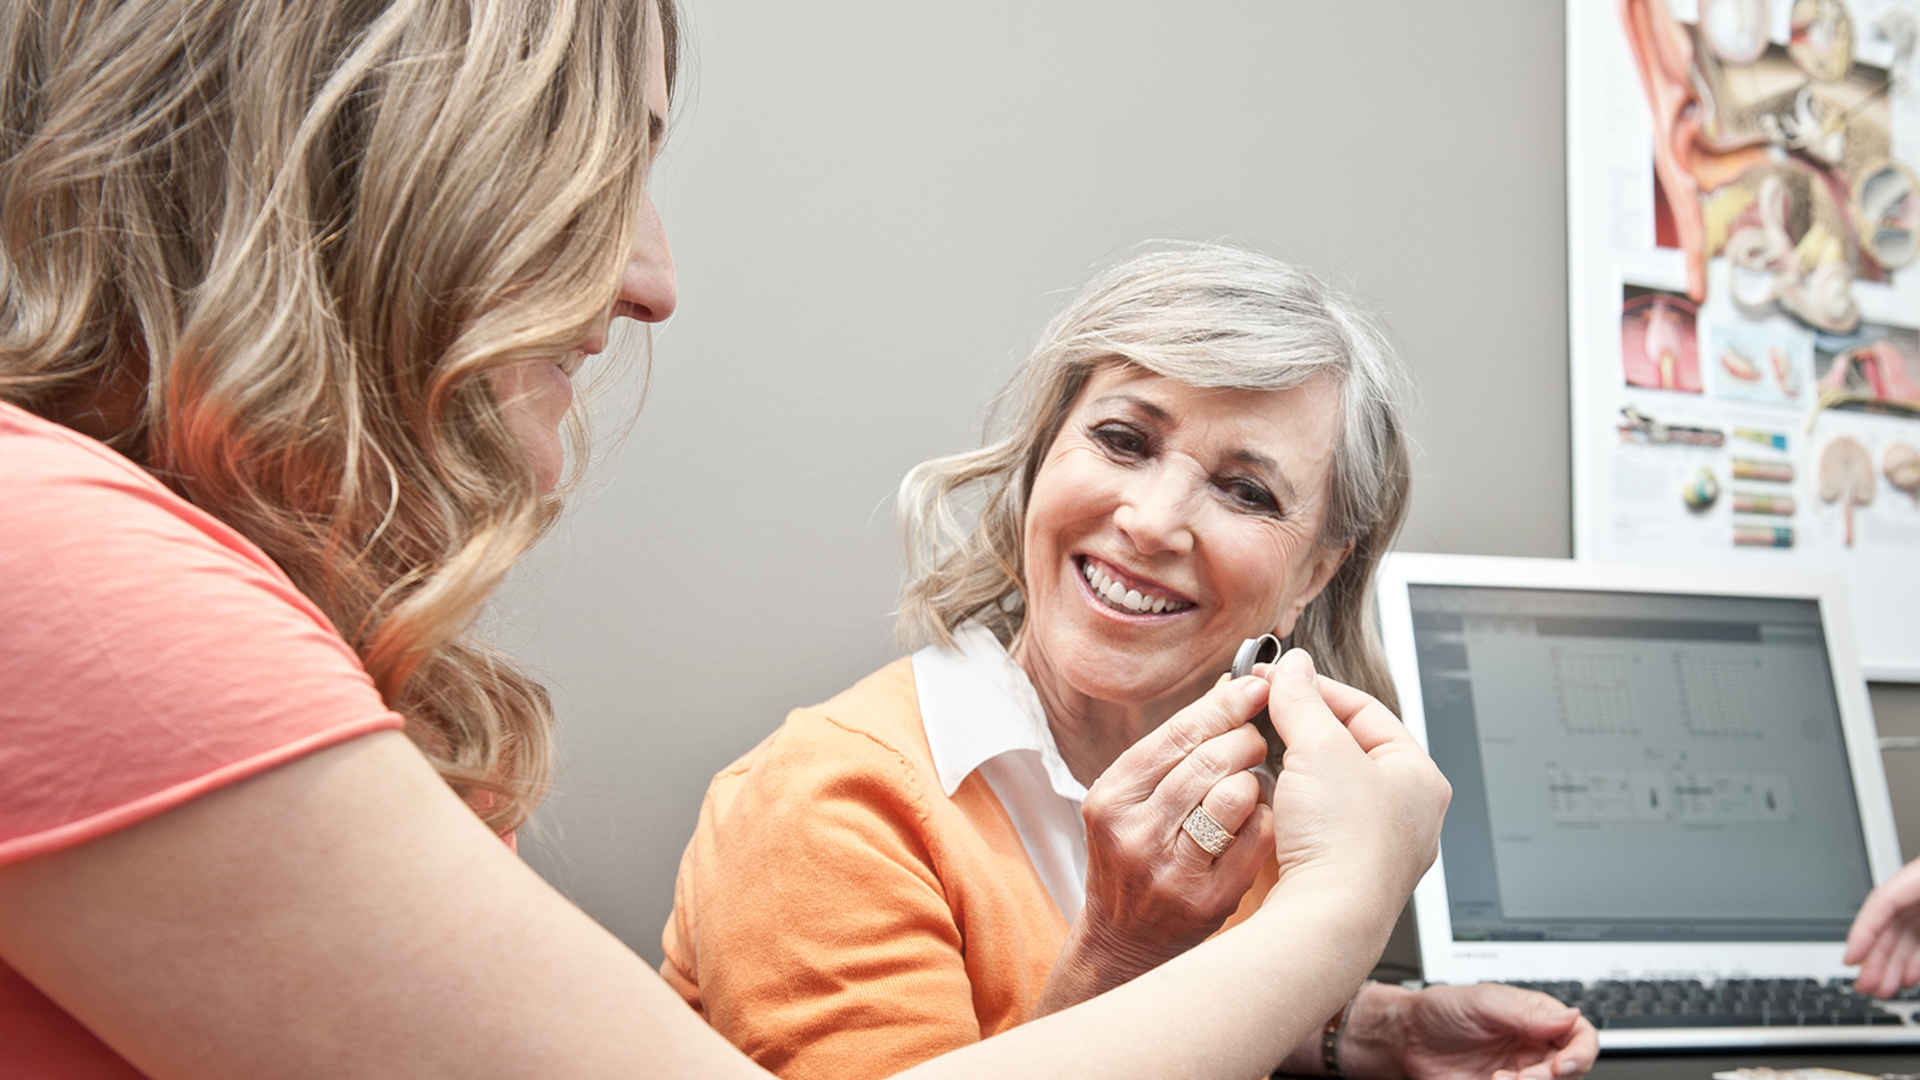 Hearing aid professional showing hearing aid to a woman